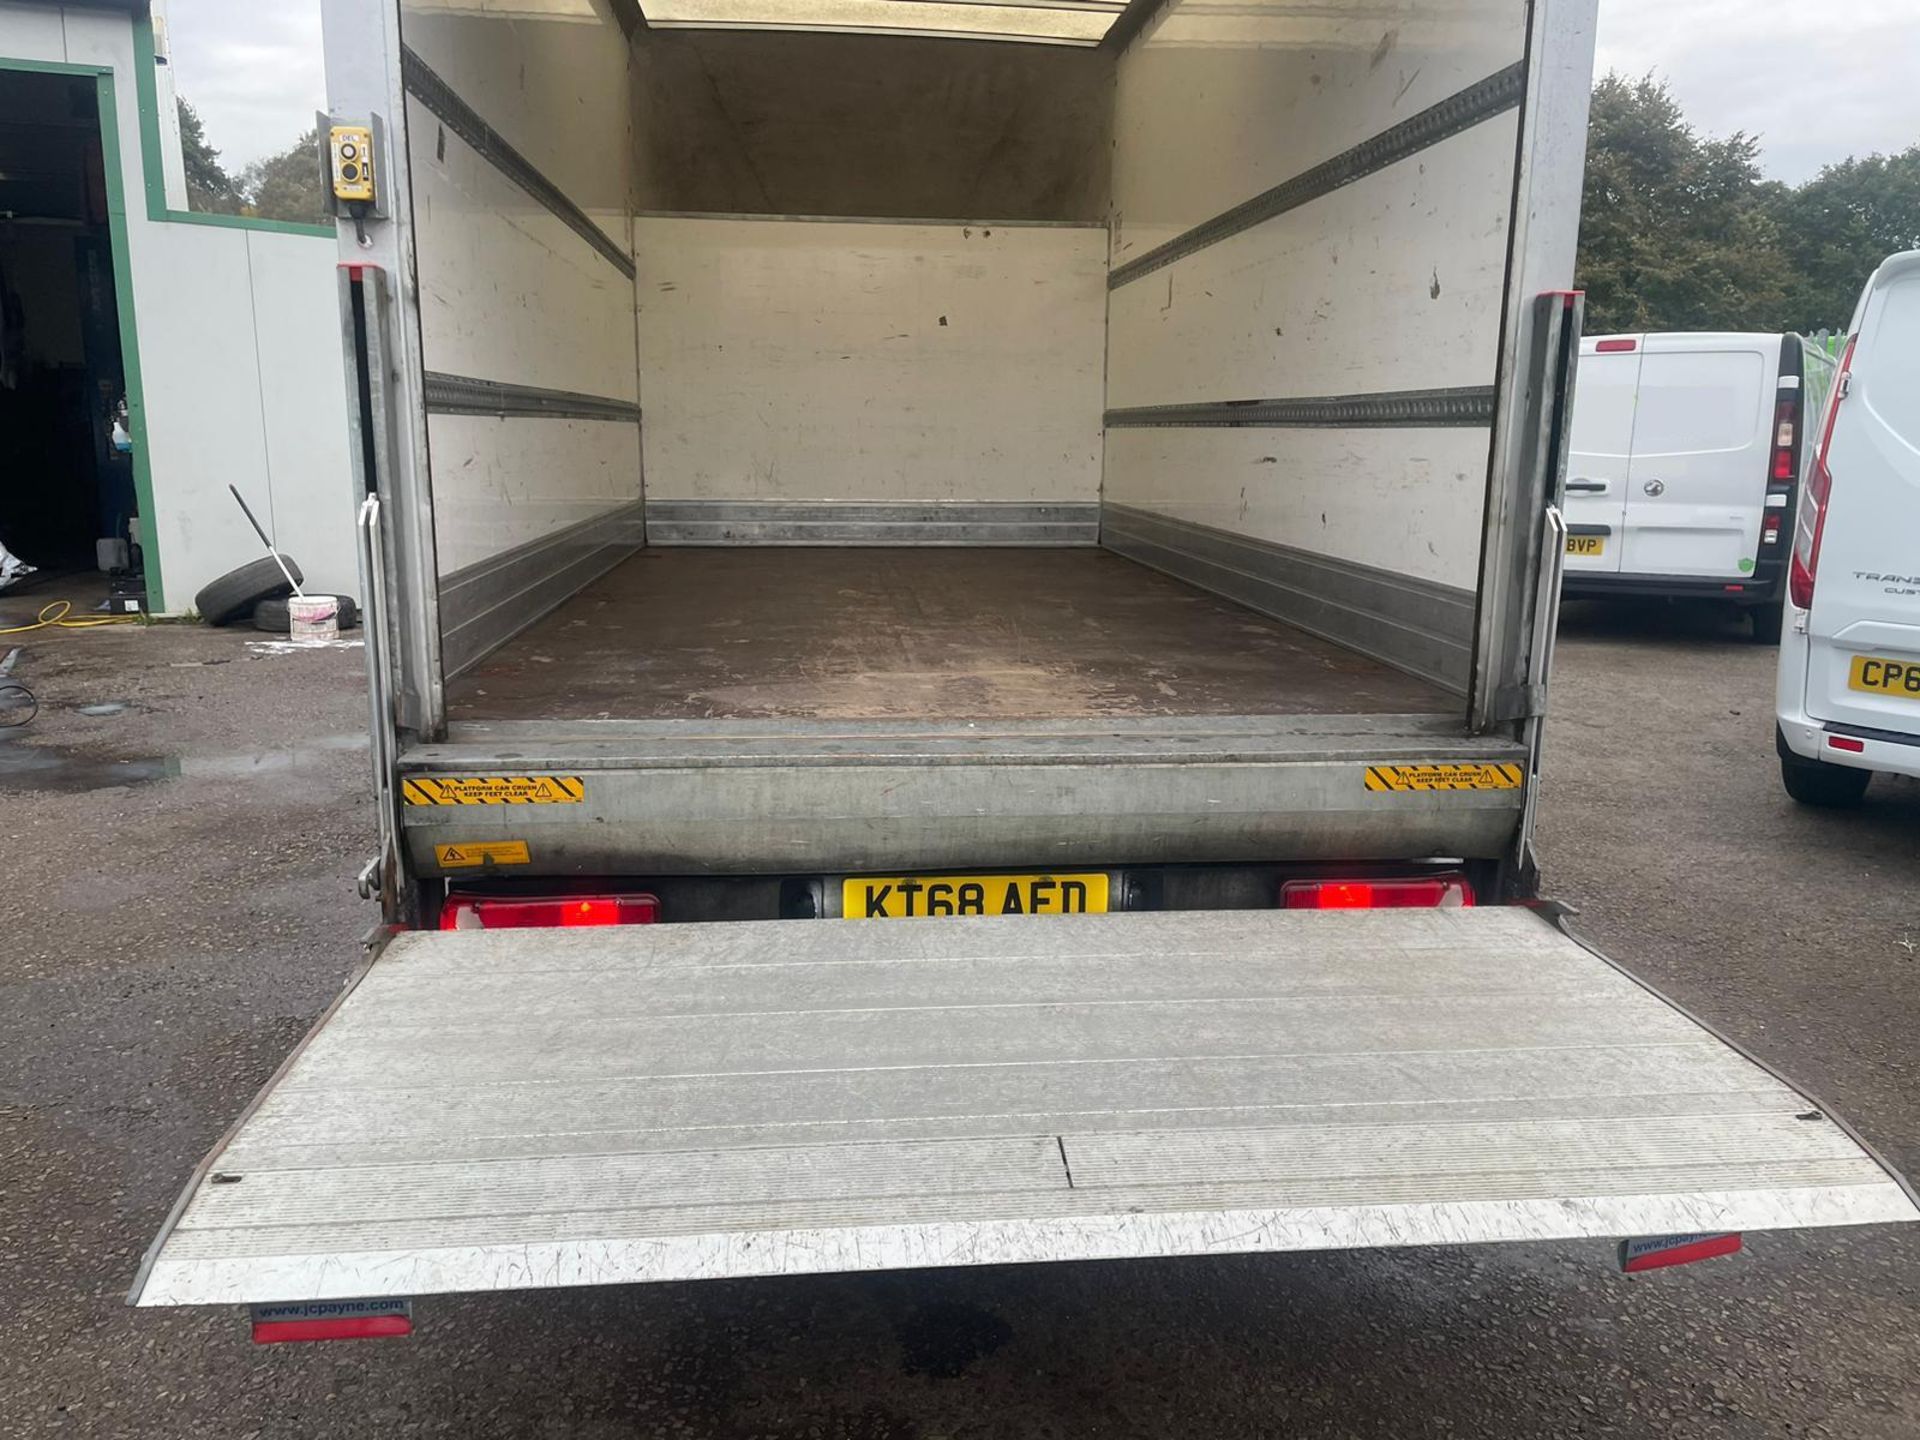 2018 MERCEDES SPRINTER 314 CDTI LUTON WITH TAIL LIFT - 108,356 WARRANTED MILES - 2.2 EURO 6 ENGINE  - Image 3 of 10